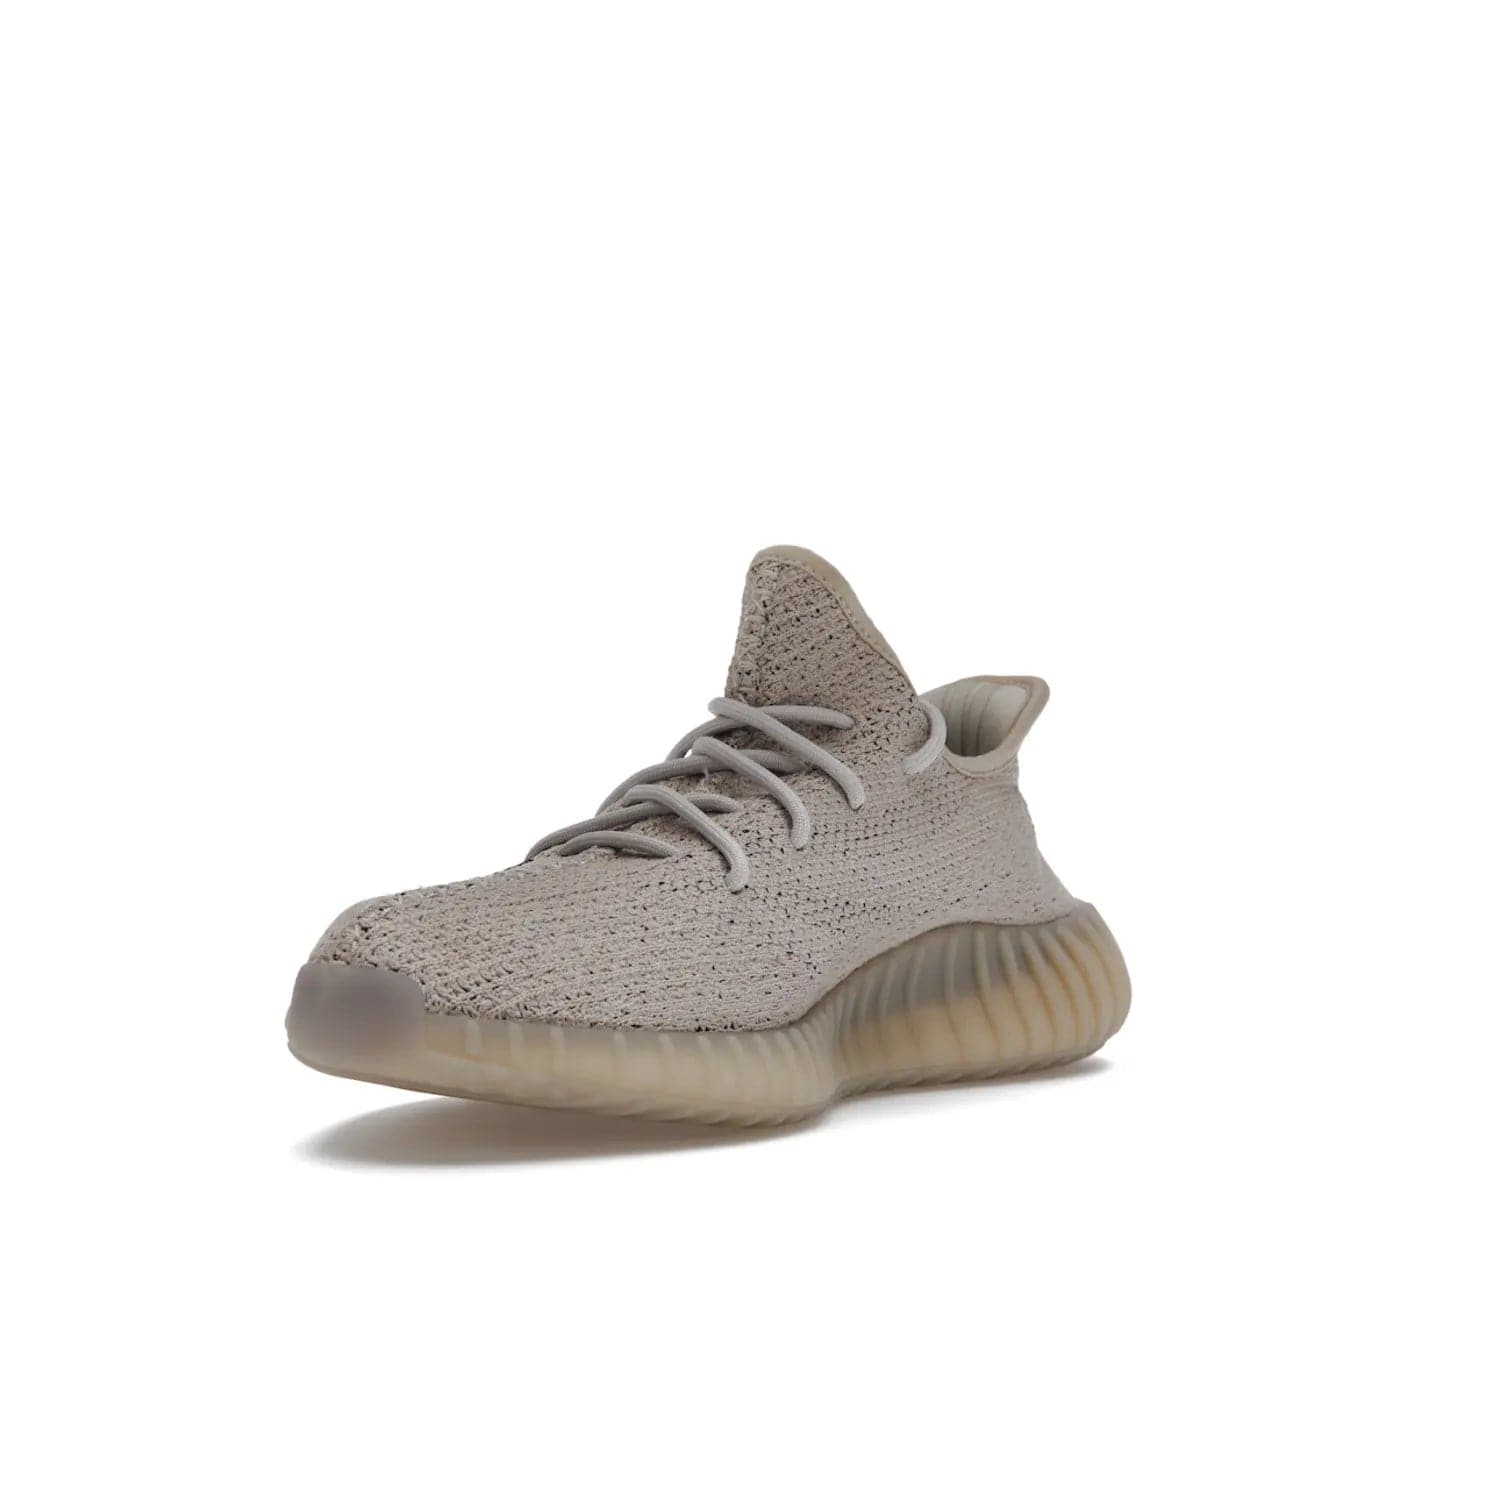 adidas Yeezy Boost 350 V2 Slate - Image 14 - Only at www.BallersClubKickz.com - Adidas Yeezy Boost 350 V2 Slate Core Black Slate featuring Primeknit upper, Boost midsole and semi-translucent TPU cage. Launched on 3/9/2022, retailed at $230.